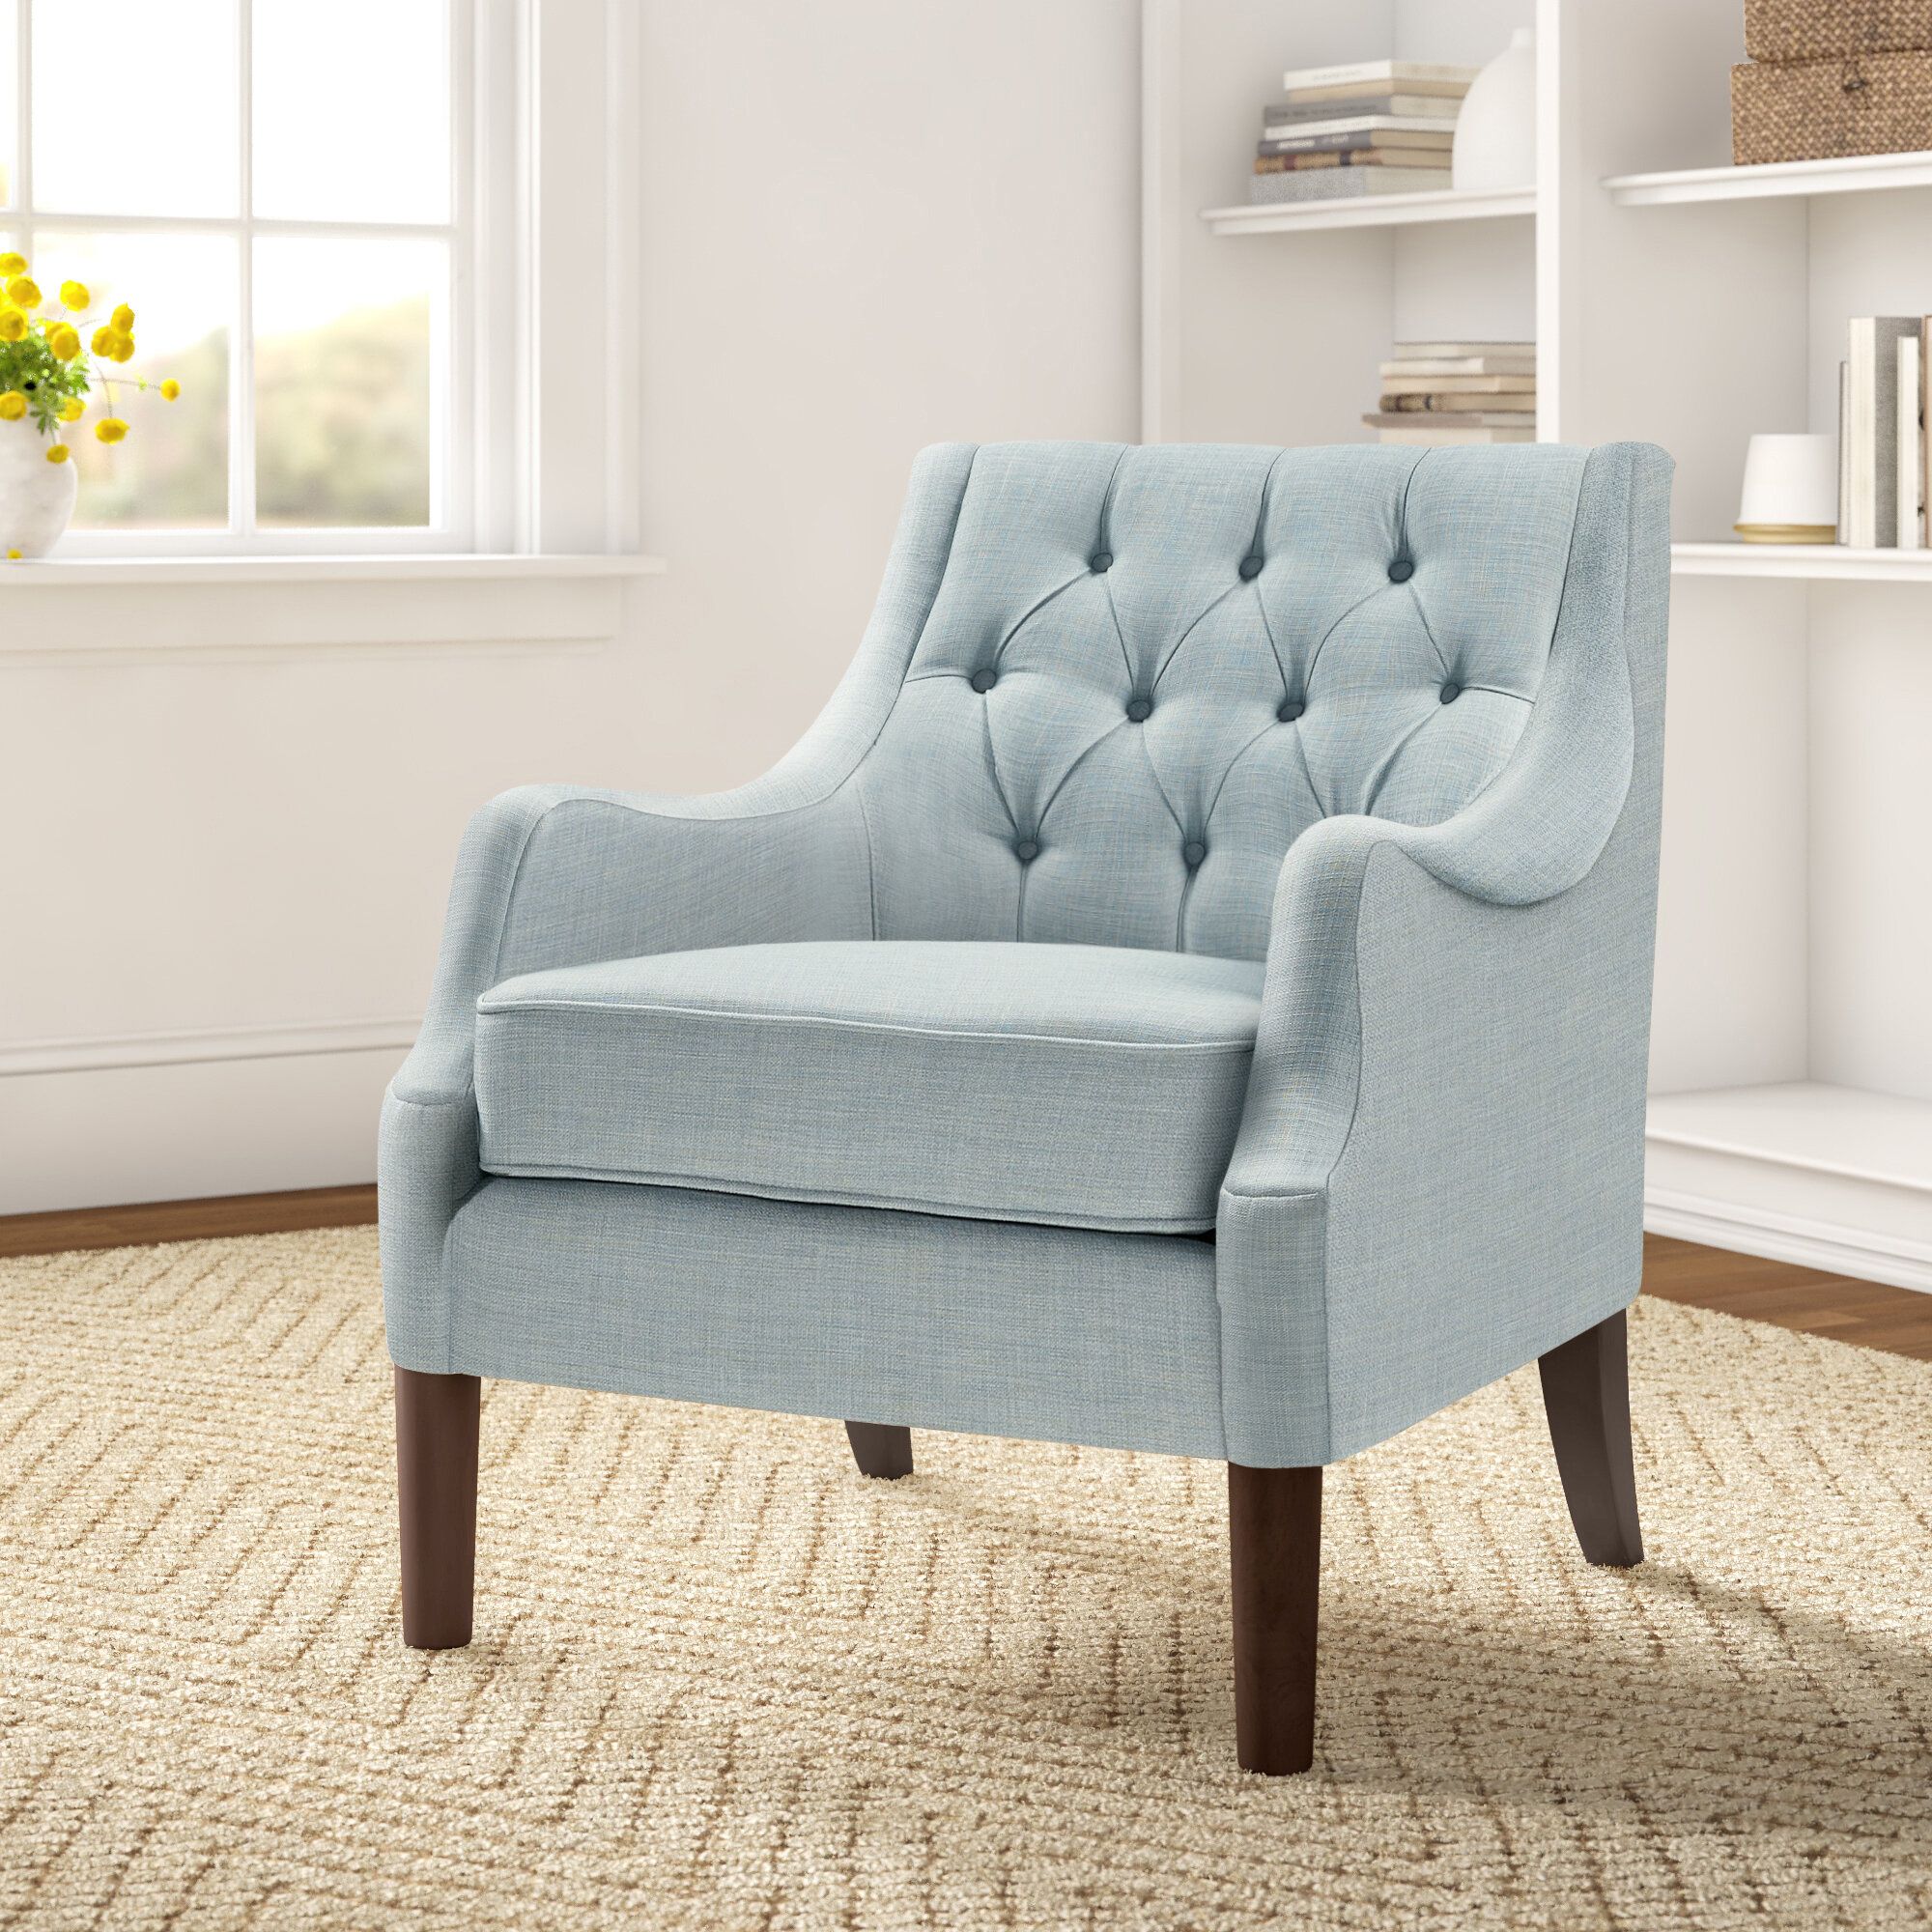 Galesville 29.25" W Tufted Polyester Wingback Chair Intended For Allis Tufted Polyester Blend Wingback Chairs (Photo 12 of 15)